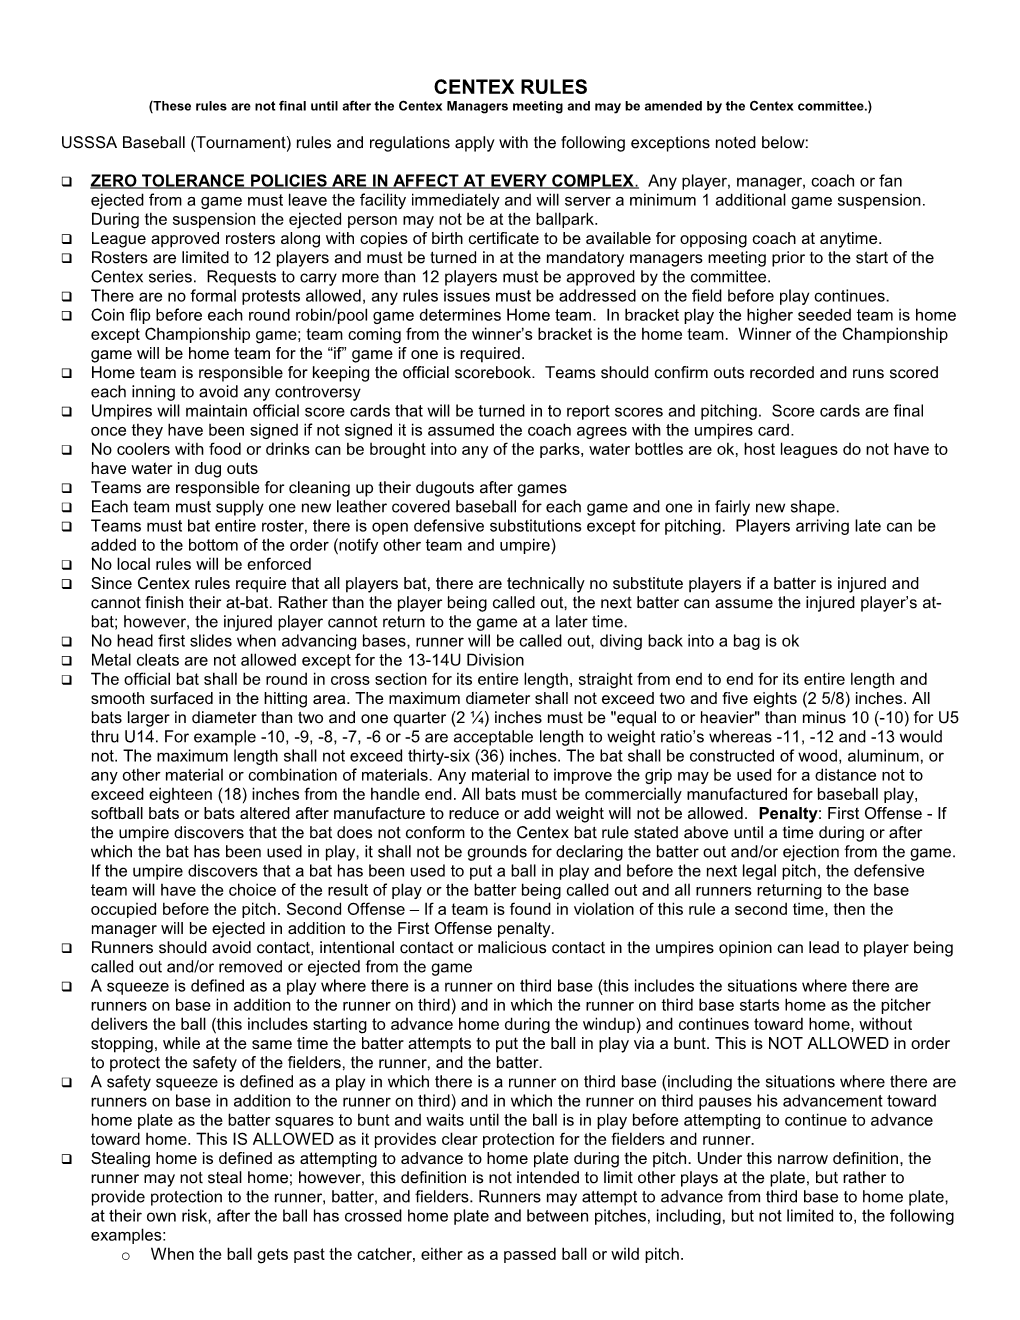 2009 Centex Information and Rules